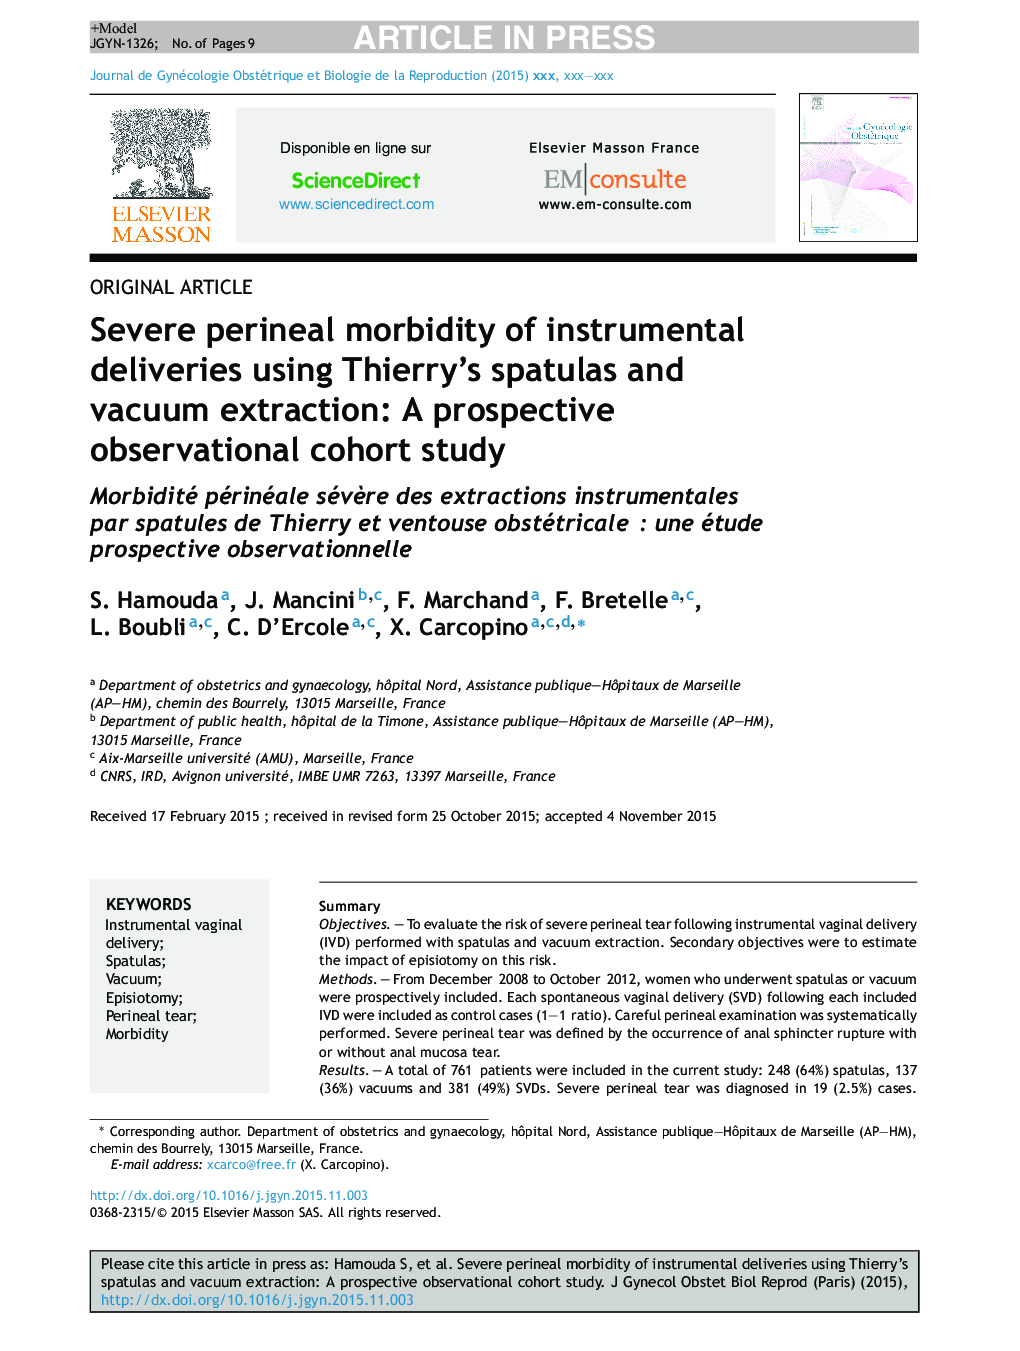 Severe perineal morbidity of instrumental deliveries using Thierry's spatulas and vacuum extraction: A prospective observational cohort study